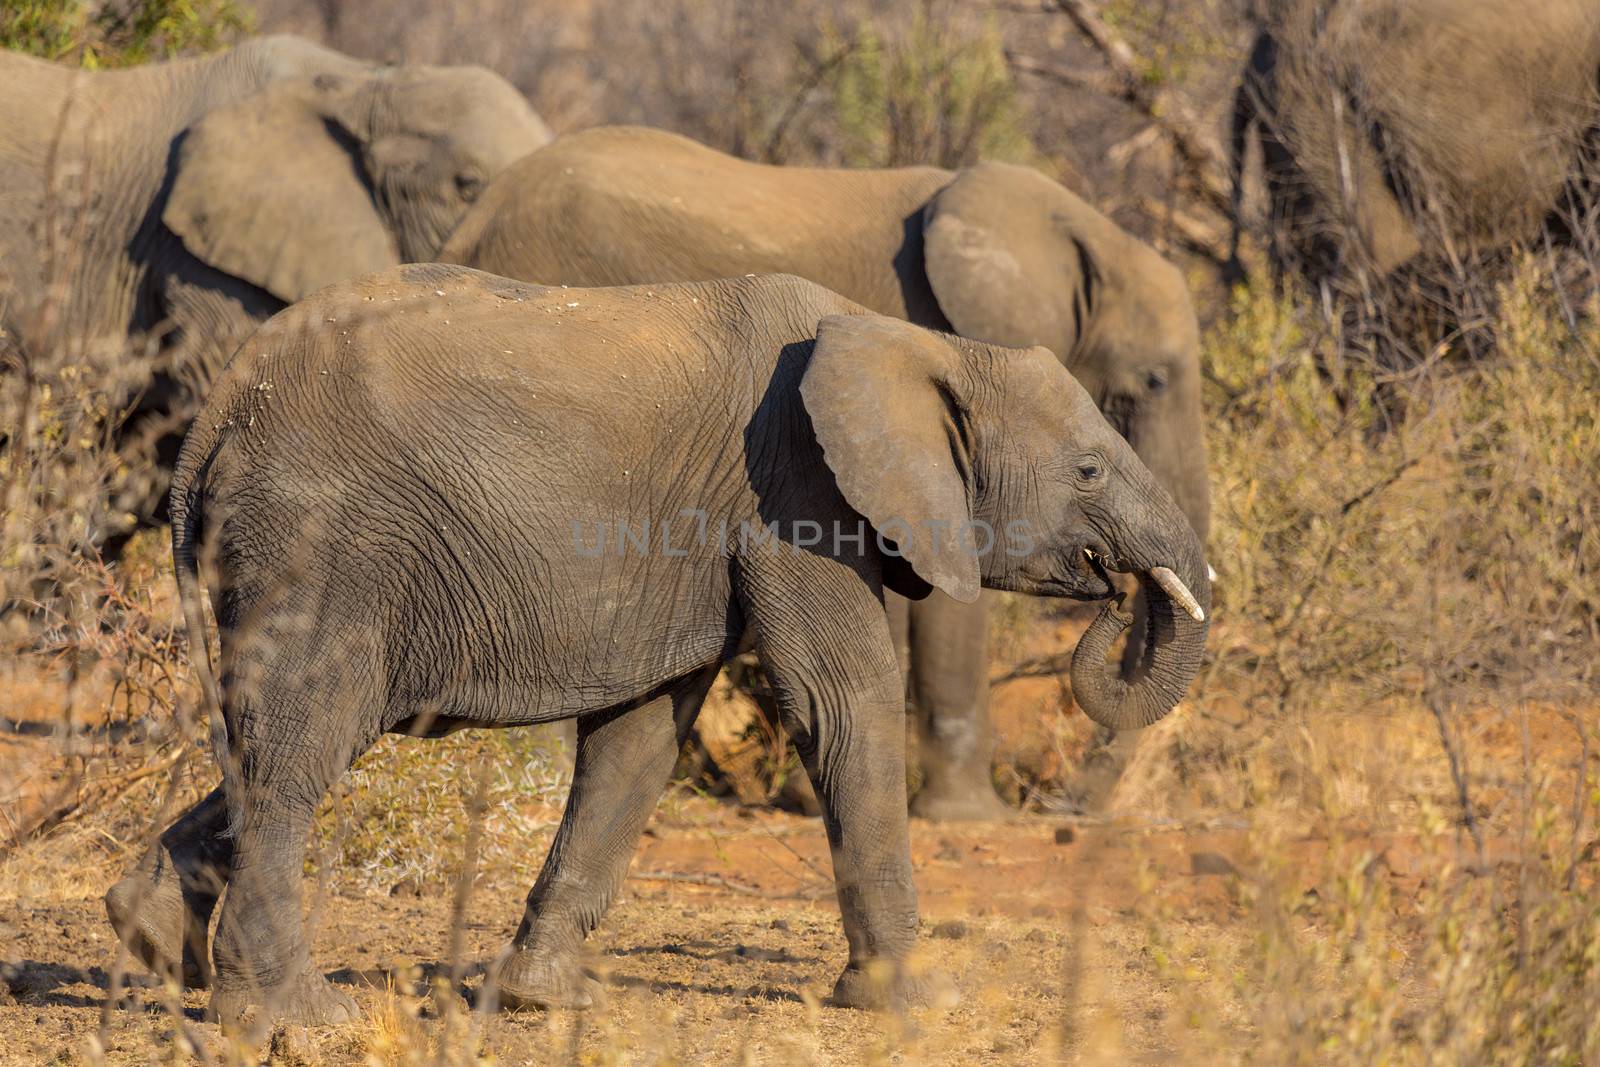 Elephants in the wild by derejeb